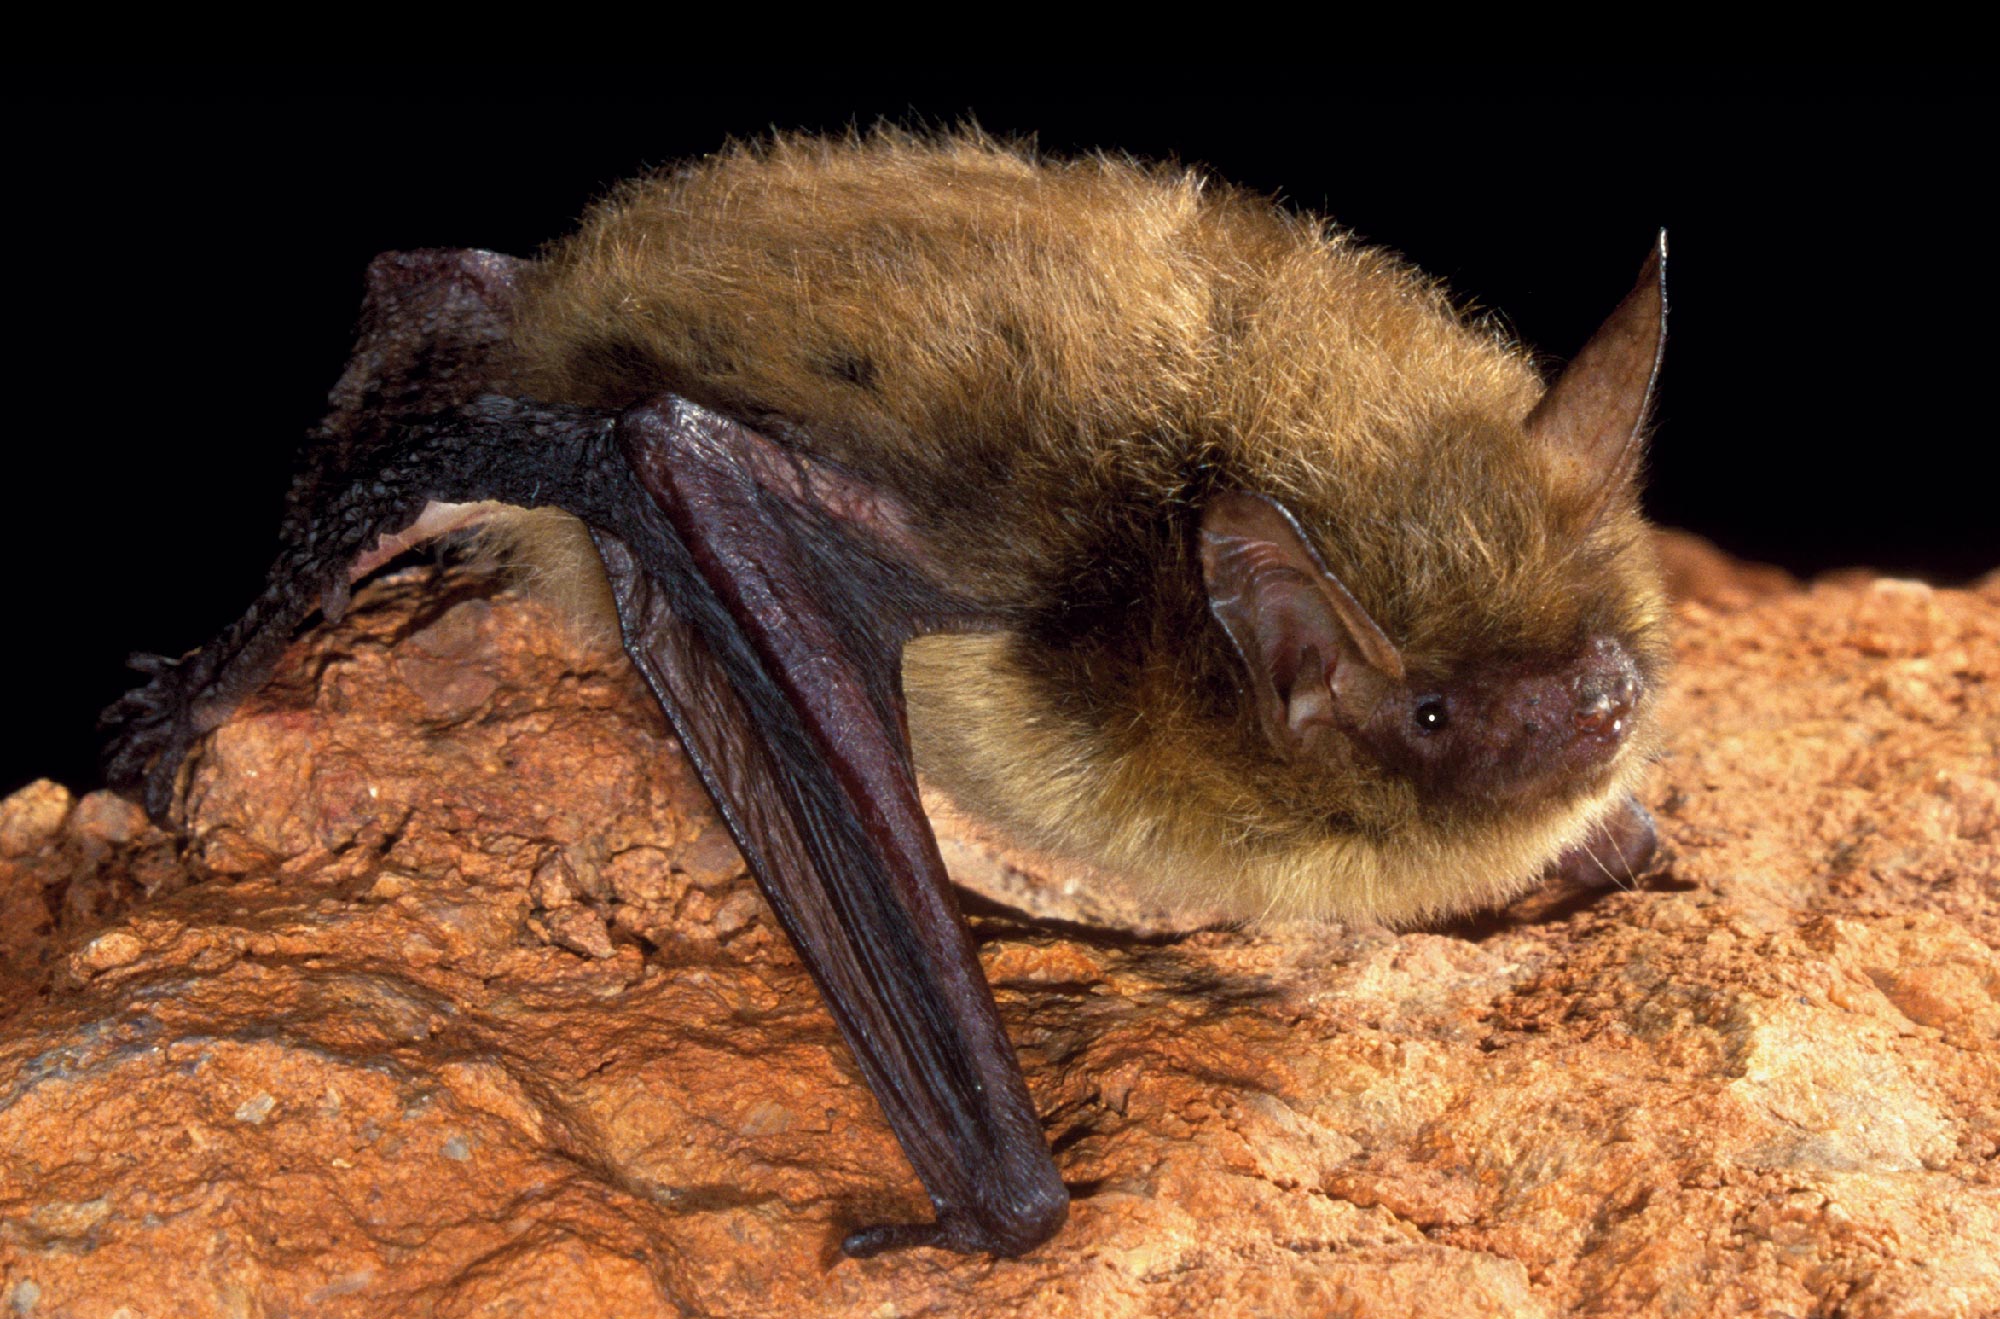 A close-up photograph perspective of the northern long-eared bat (Myotis septentrionalis) on a rock, picture courtesy: J. Scott Altenbach